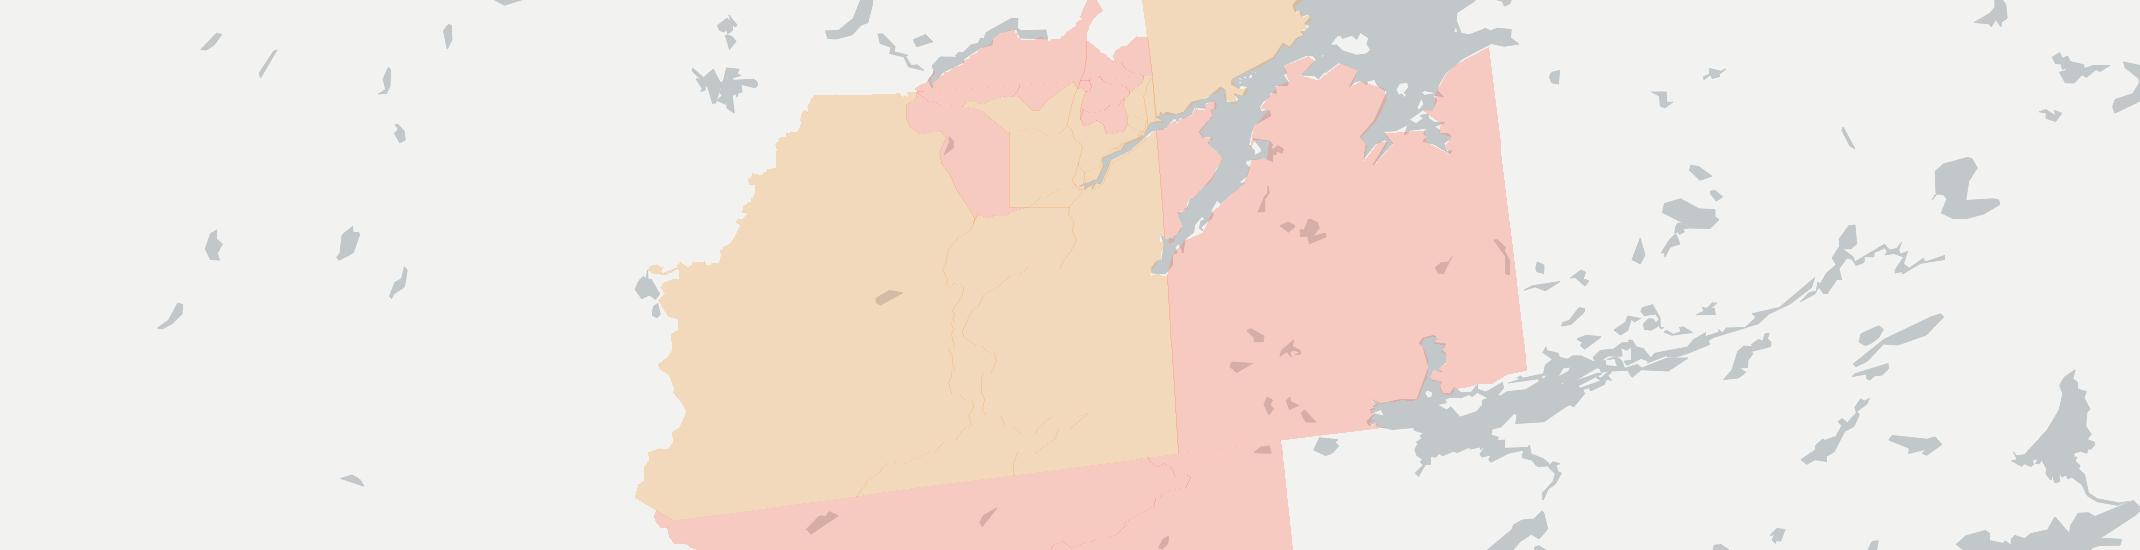 Wanakena Internet Competition Map. Click for interactive map.